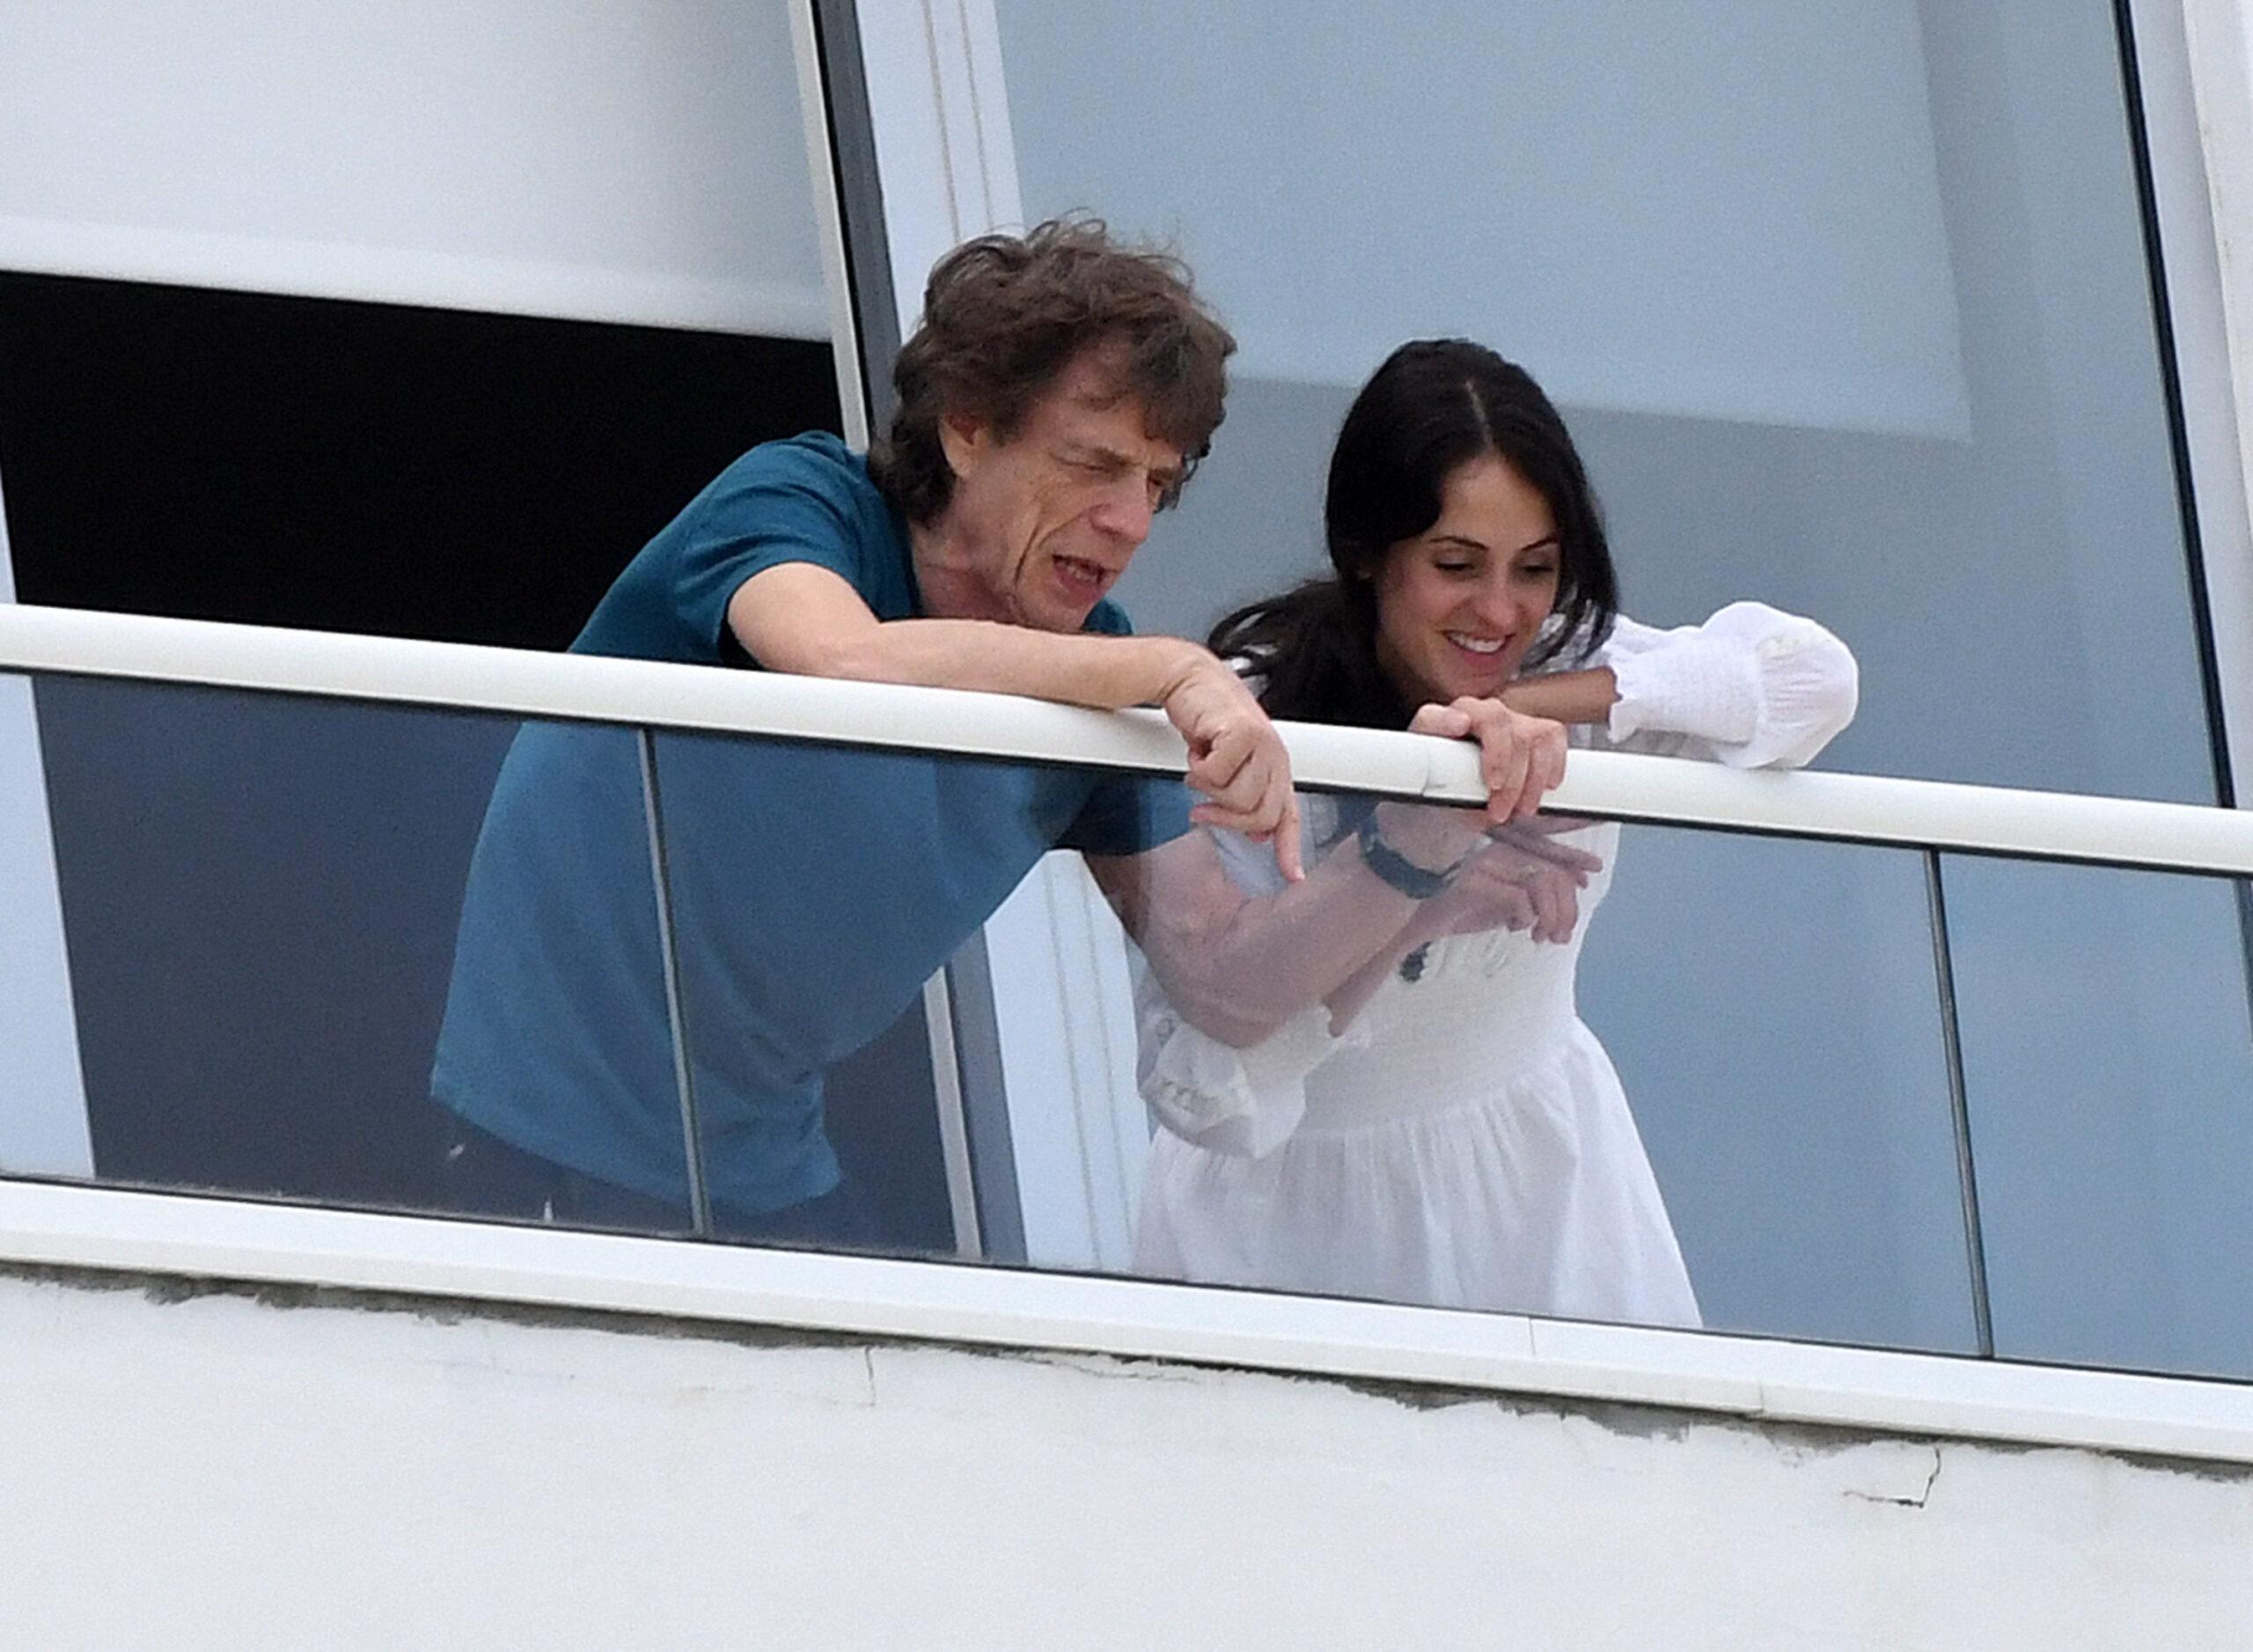 Rolling Stones Rocker Mick Jagger, 79, Is Reportedly Engaged To Melanie Hamrick, 36